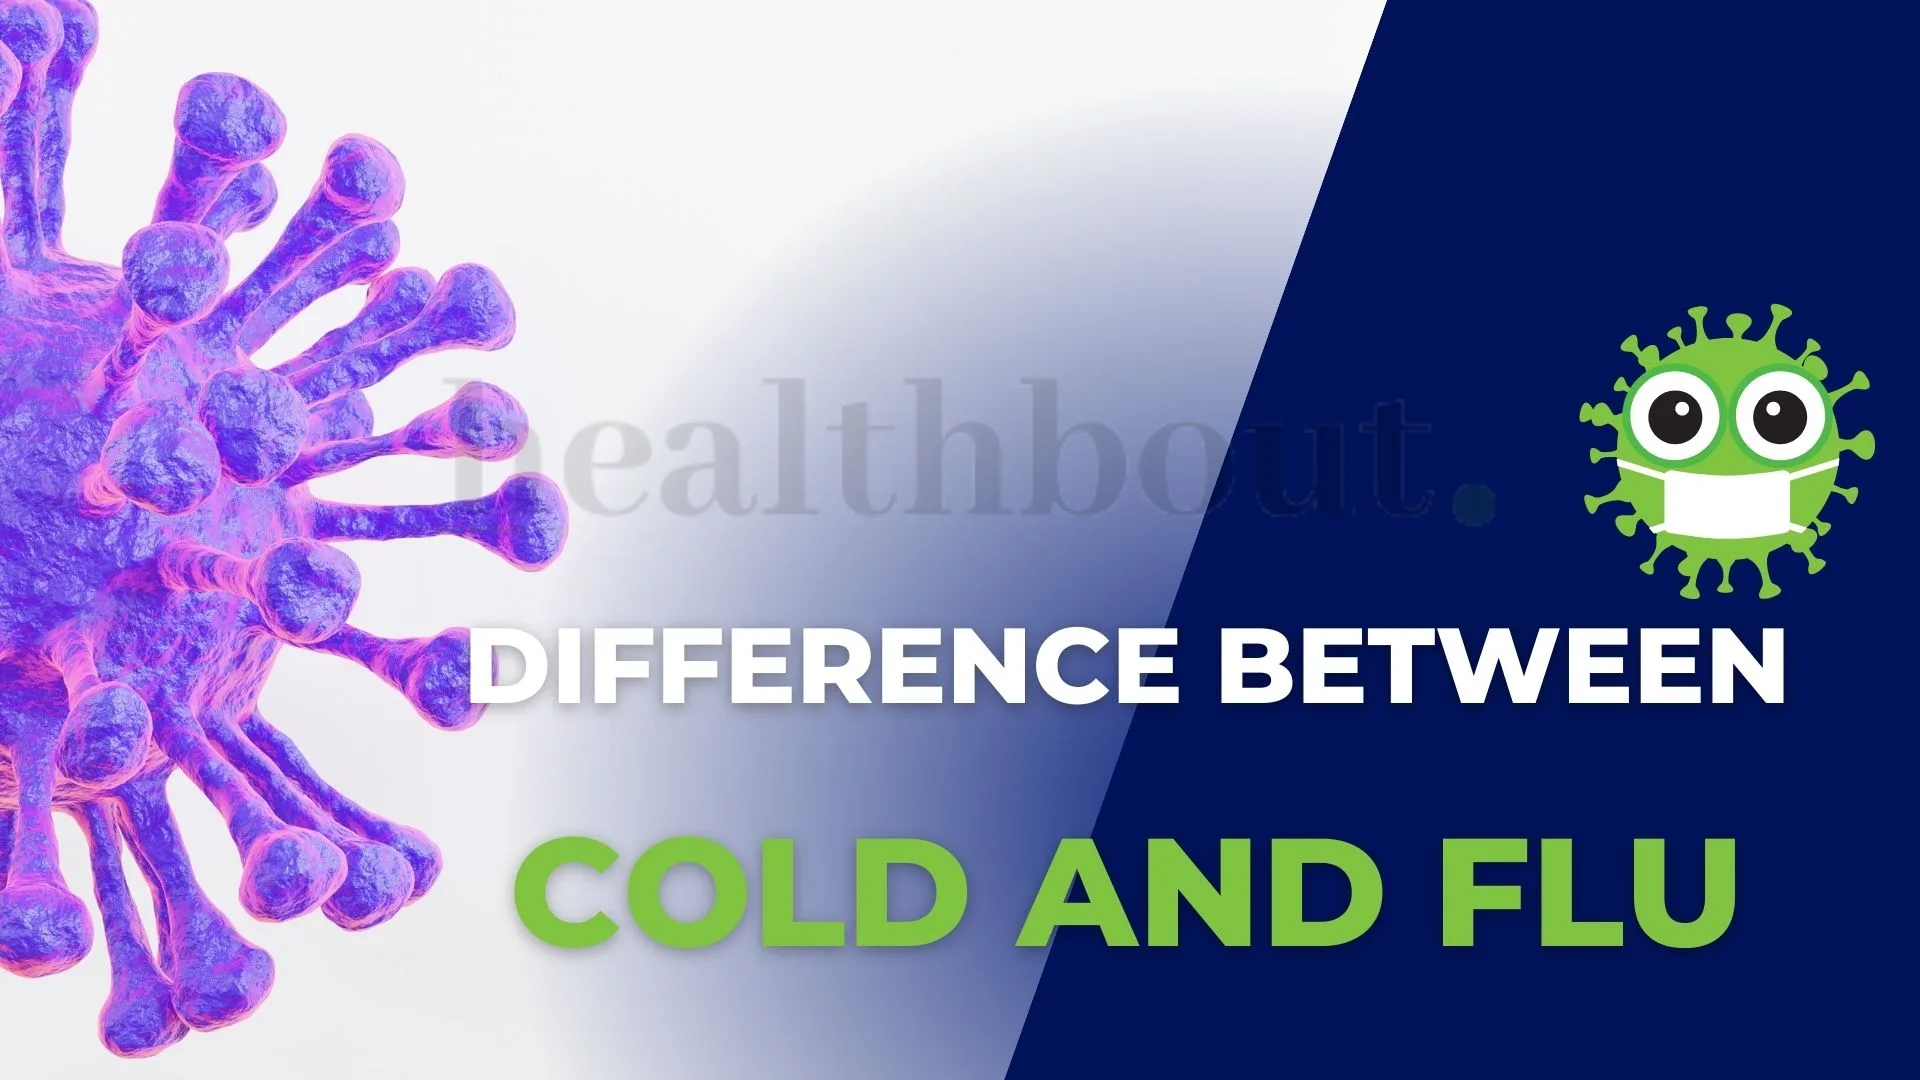 Difference Between Cold and Flu